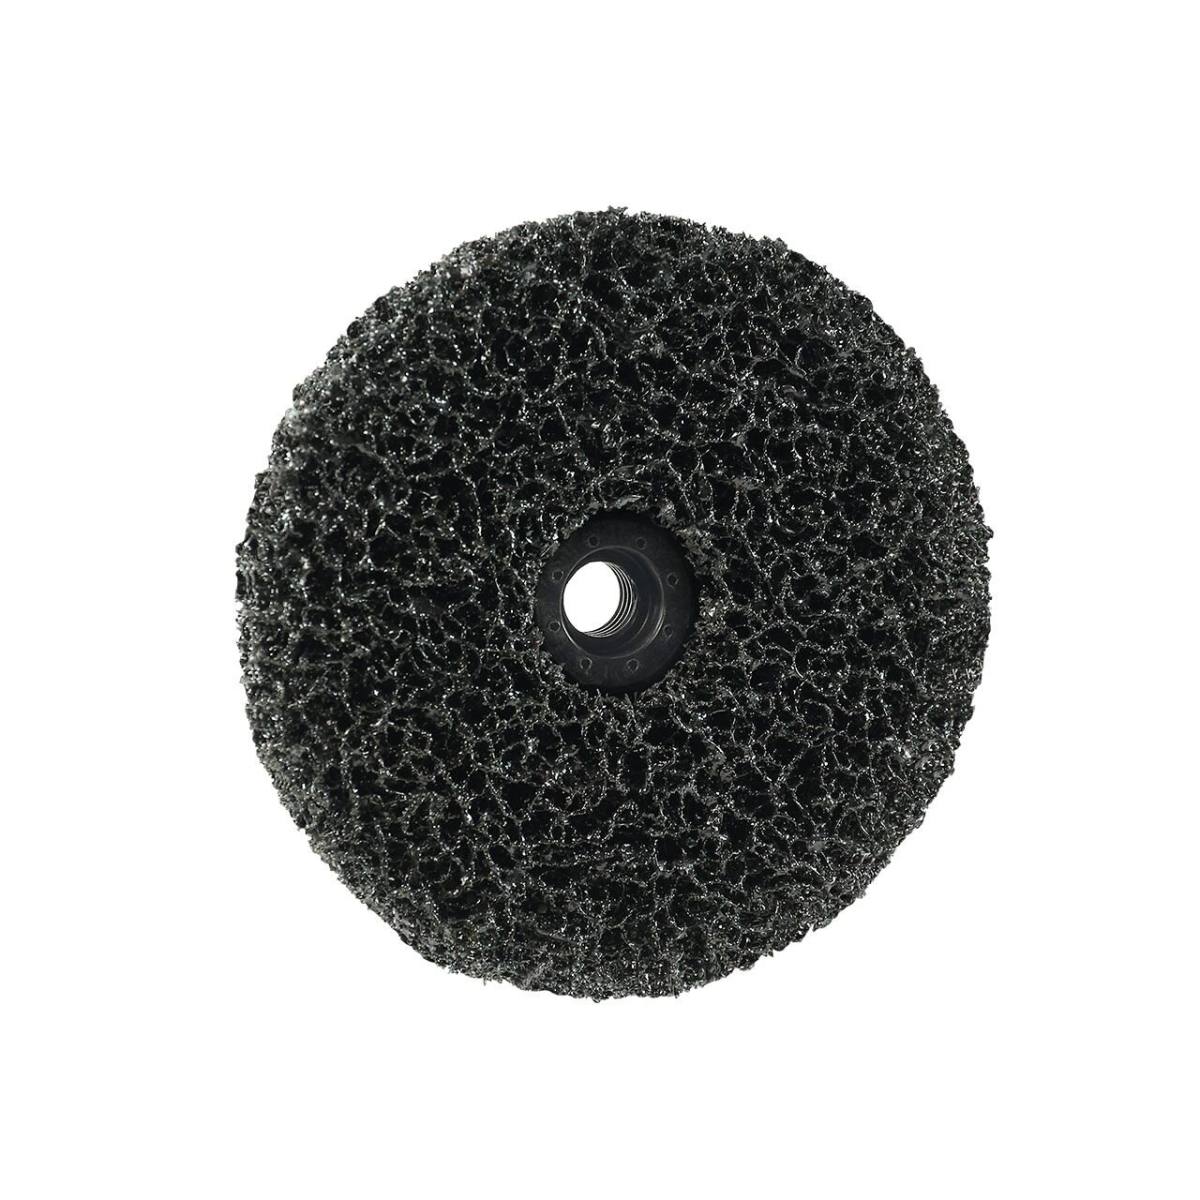 S-K-S coarse cleaning disk 125mm with M14 thread